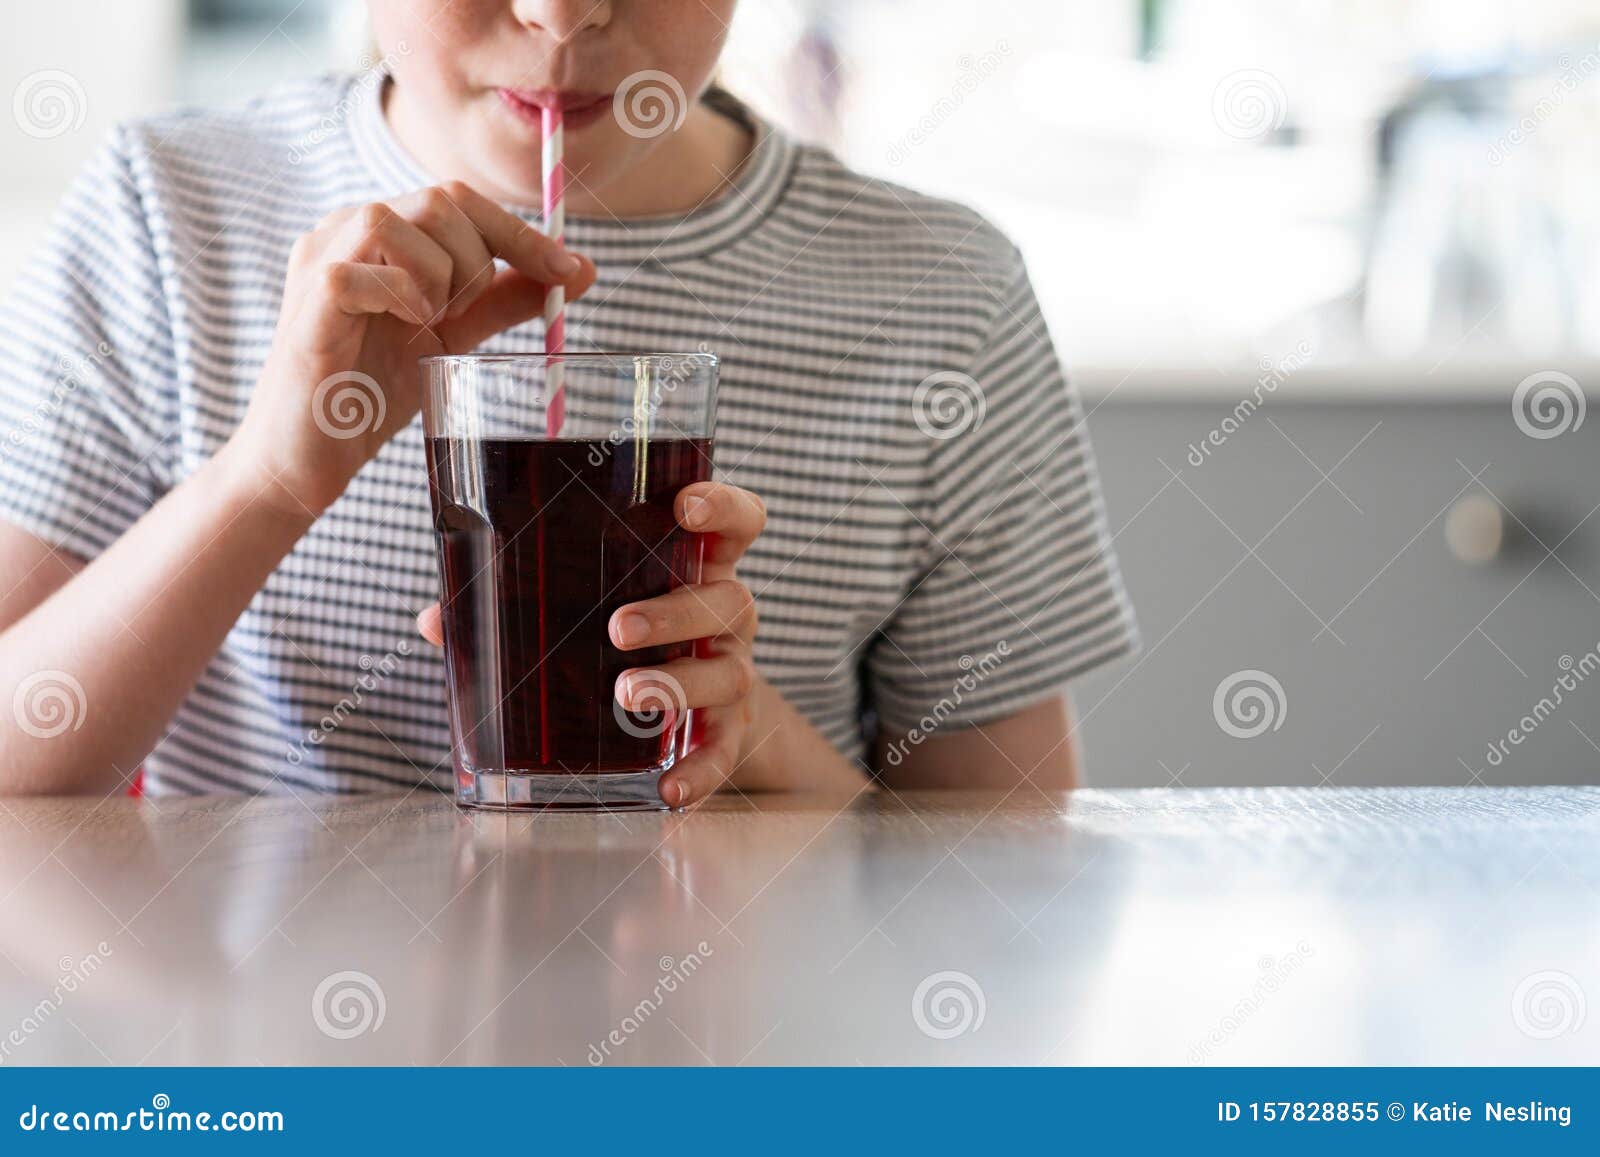 close up of girl drinking sugary fizzy soda from glass with straw